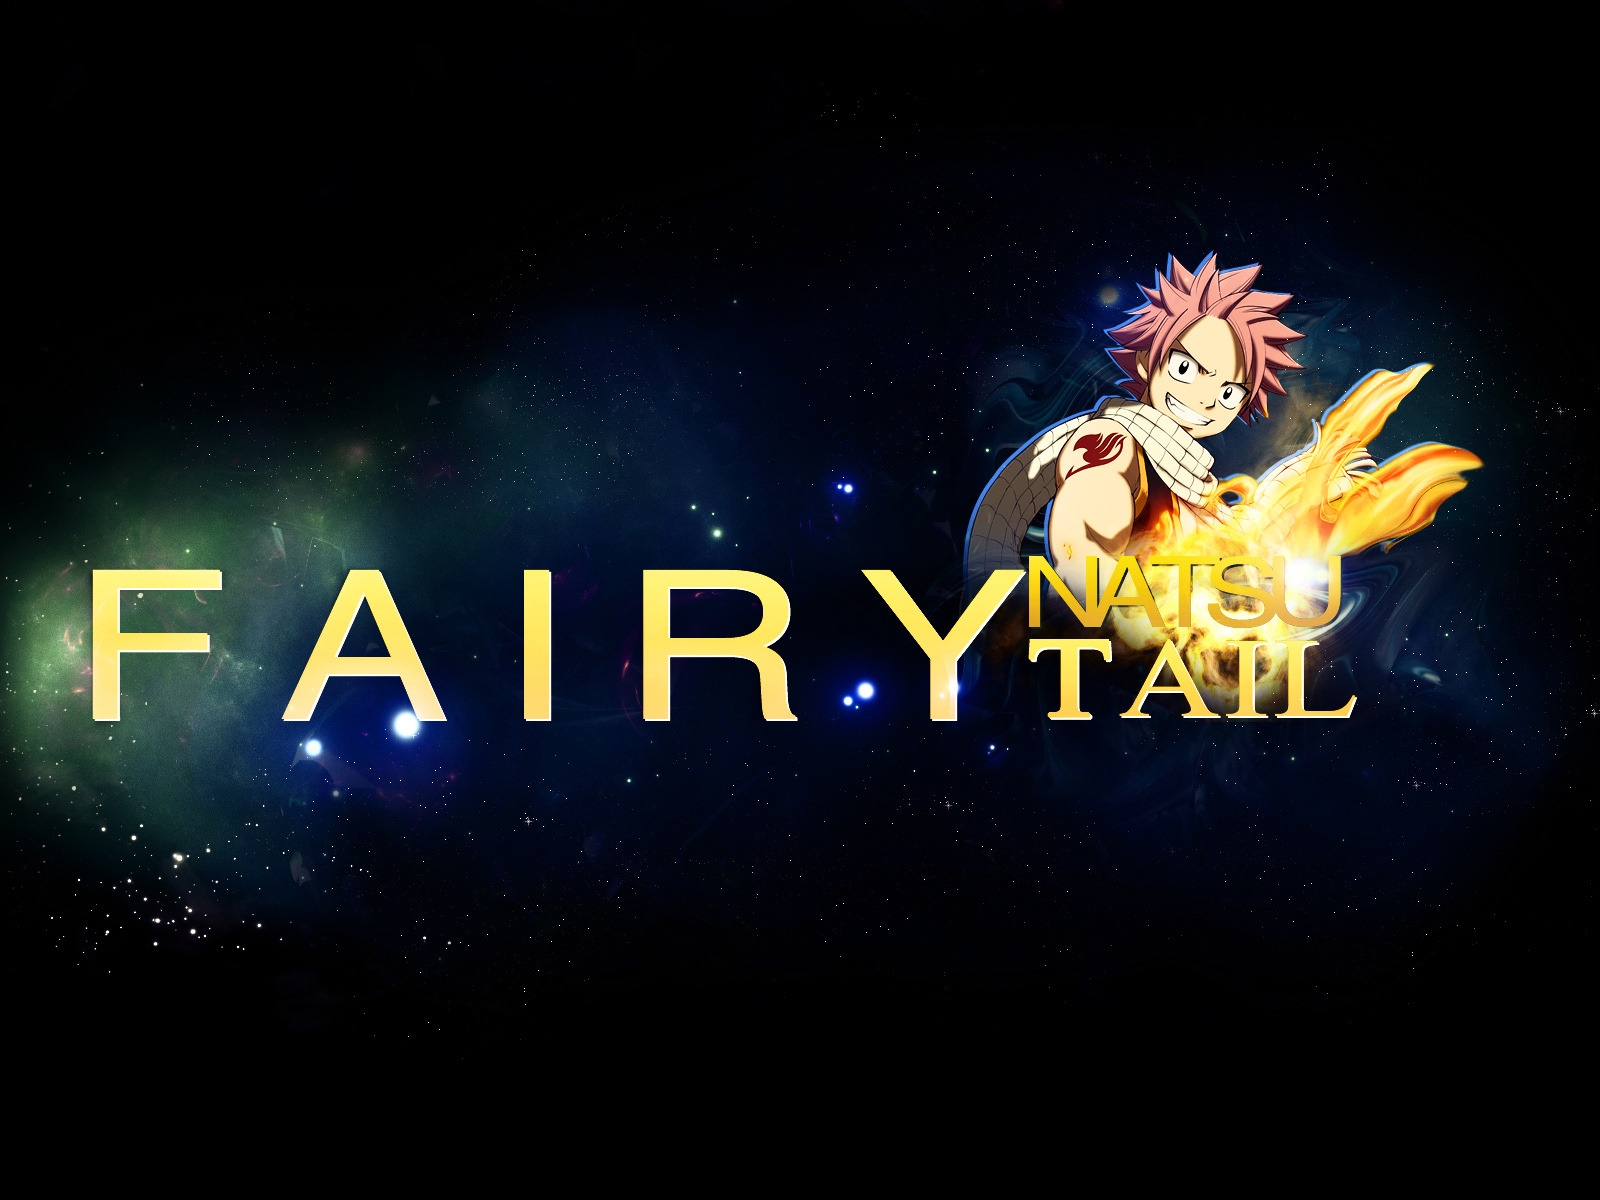 Fairy Tail Natsu for 1600 x 1200 resolution